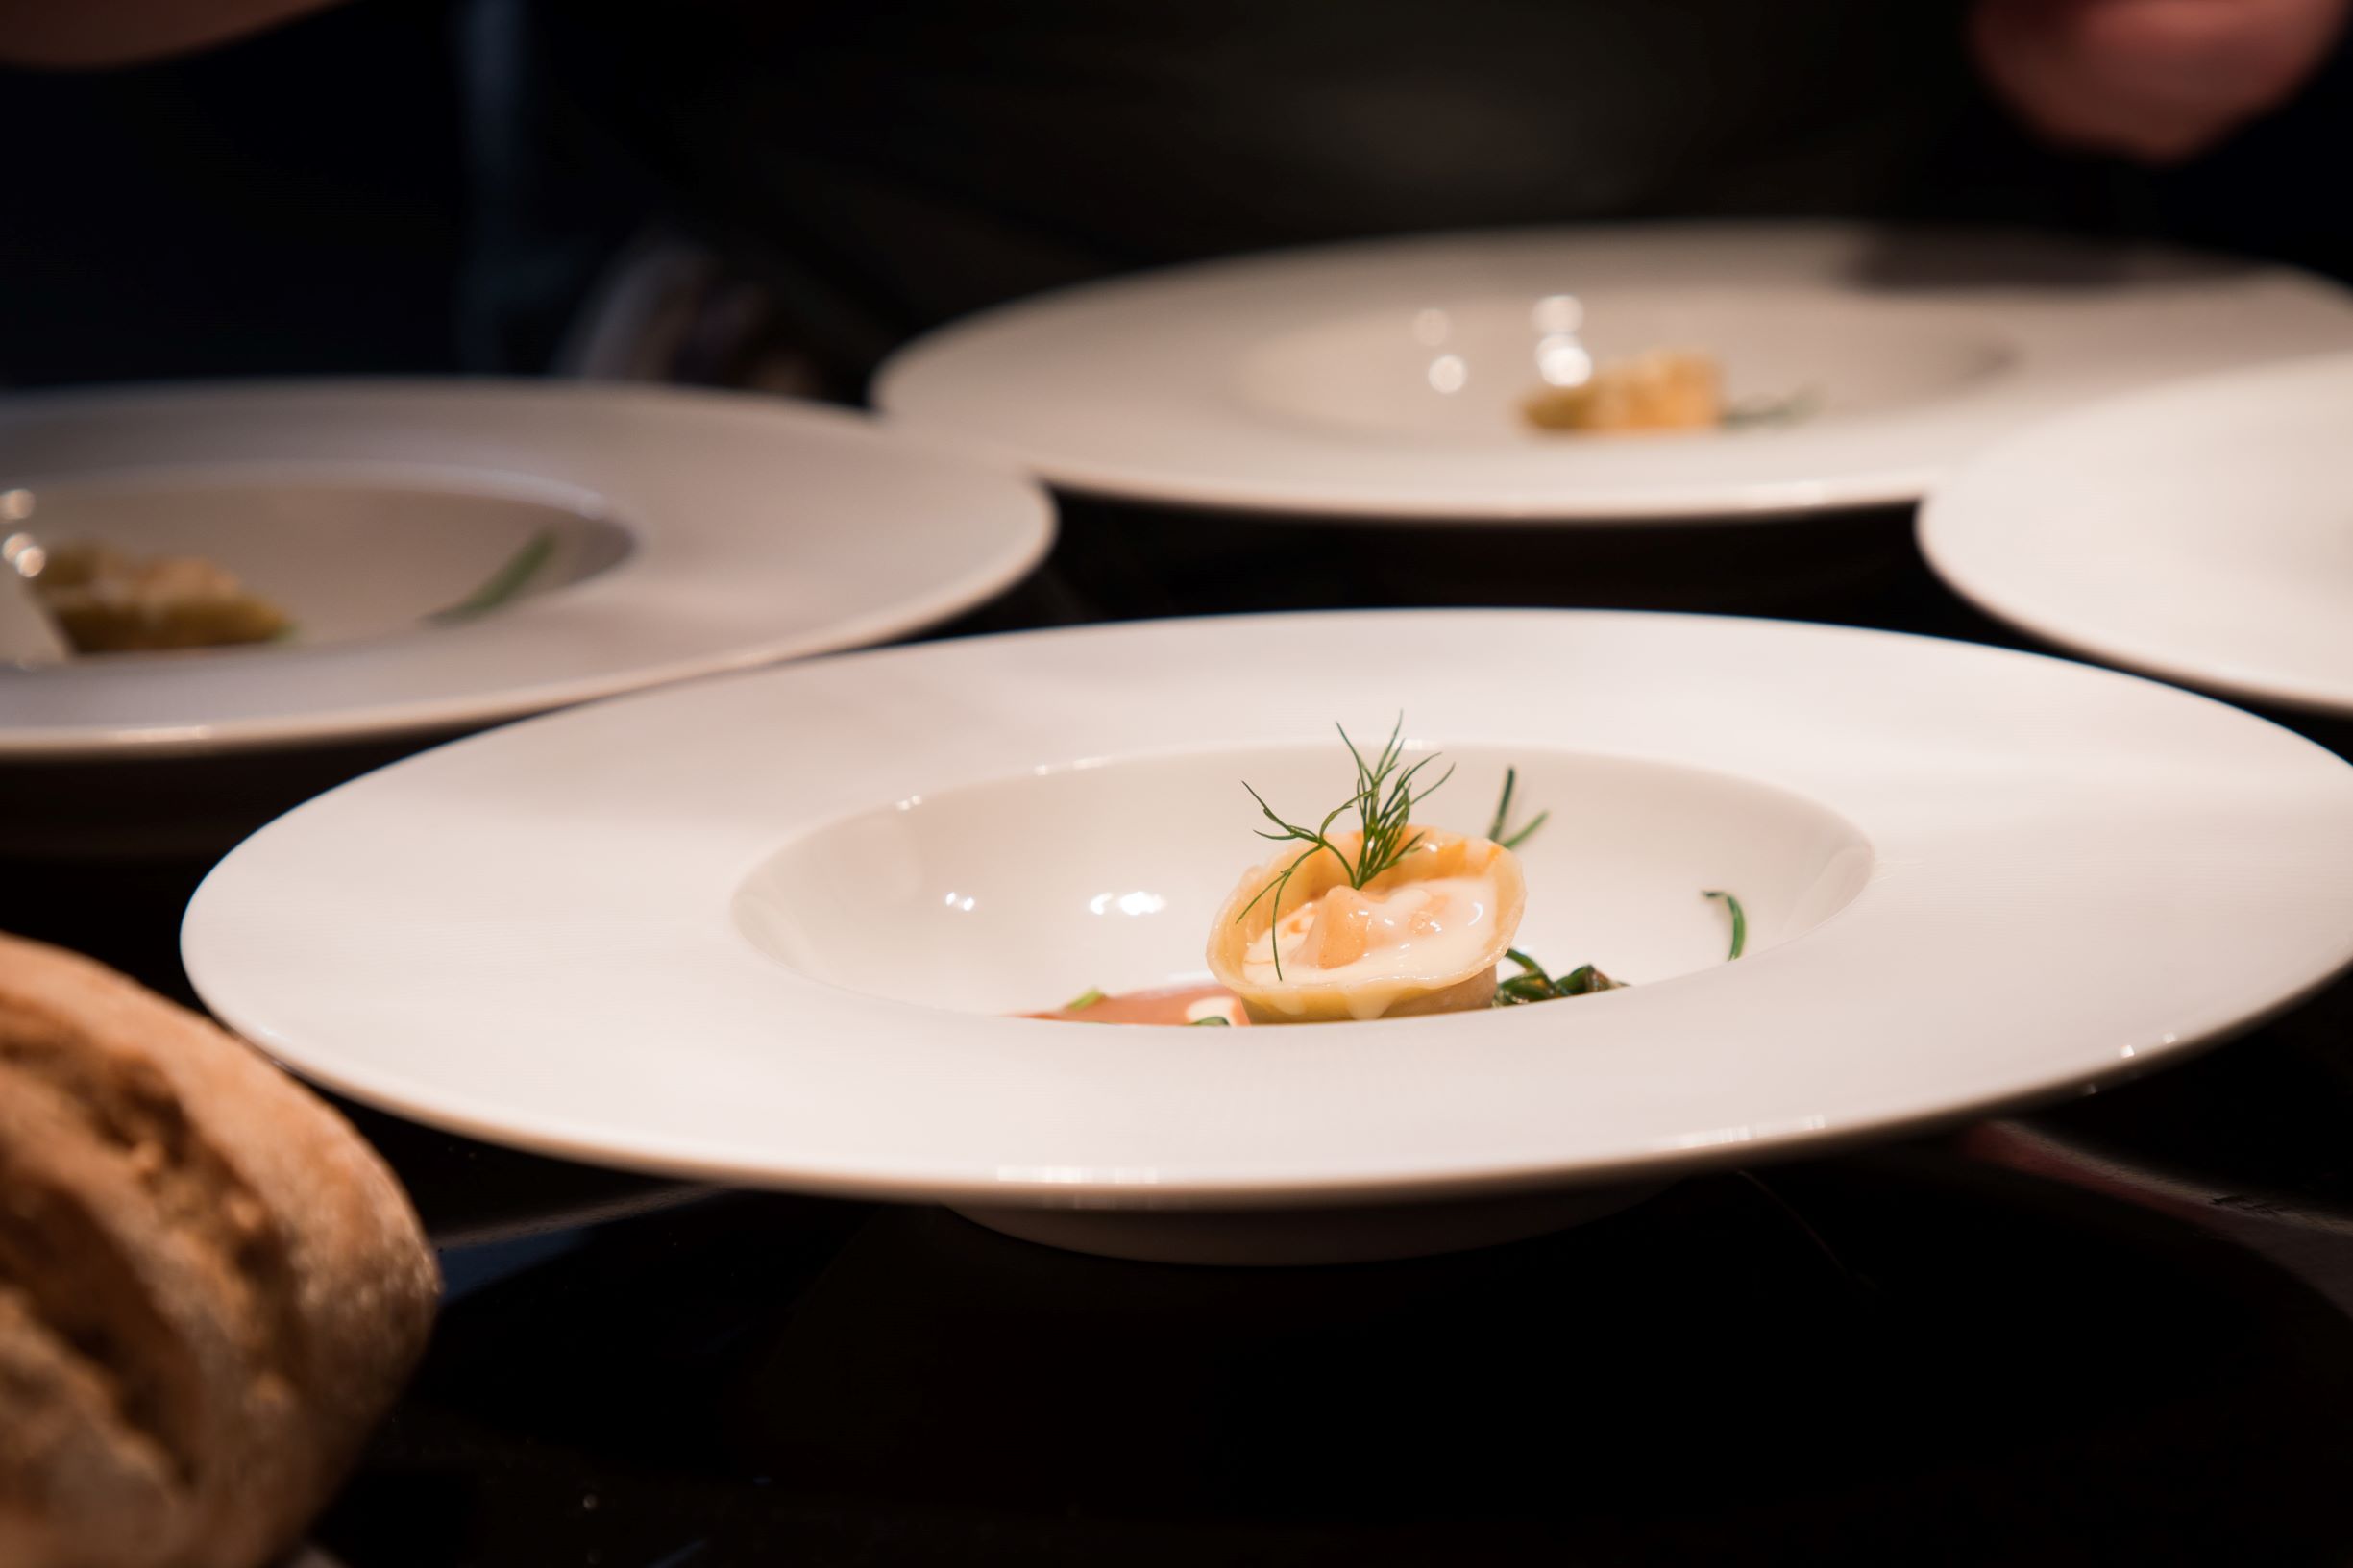 fine dining plates suppliers